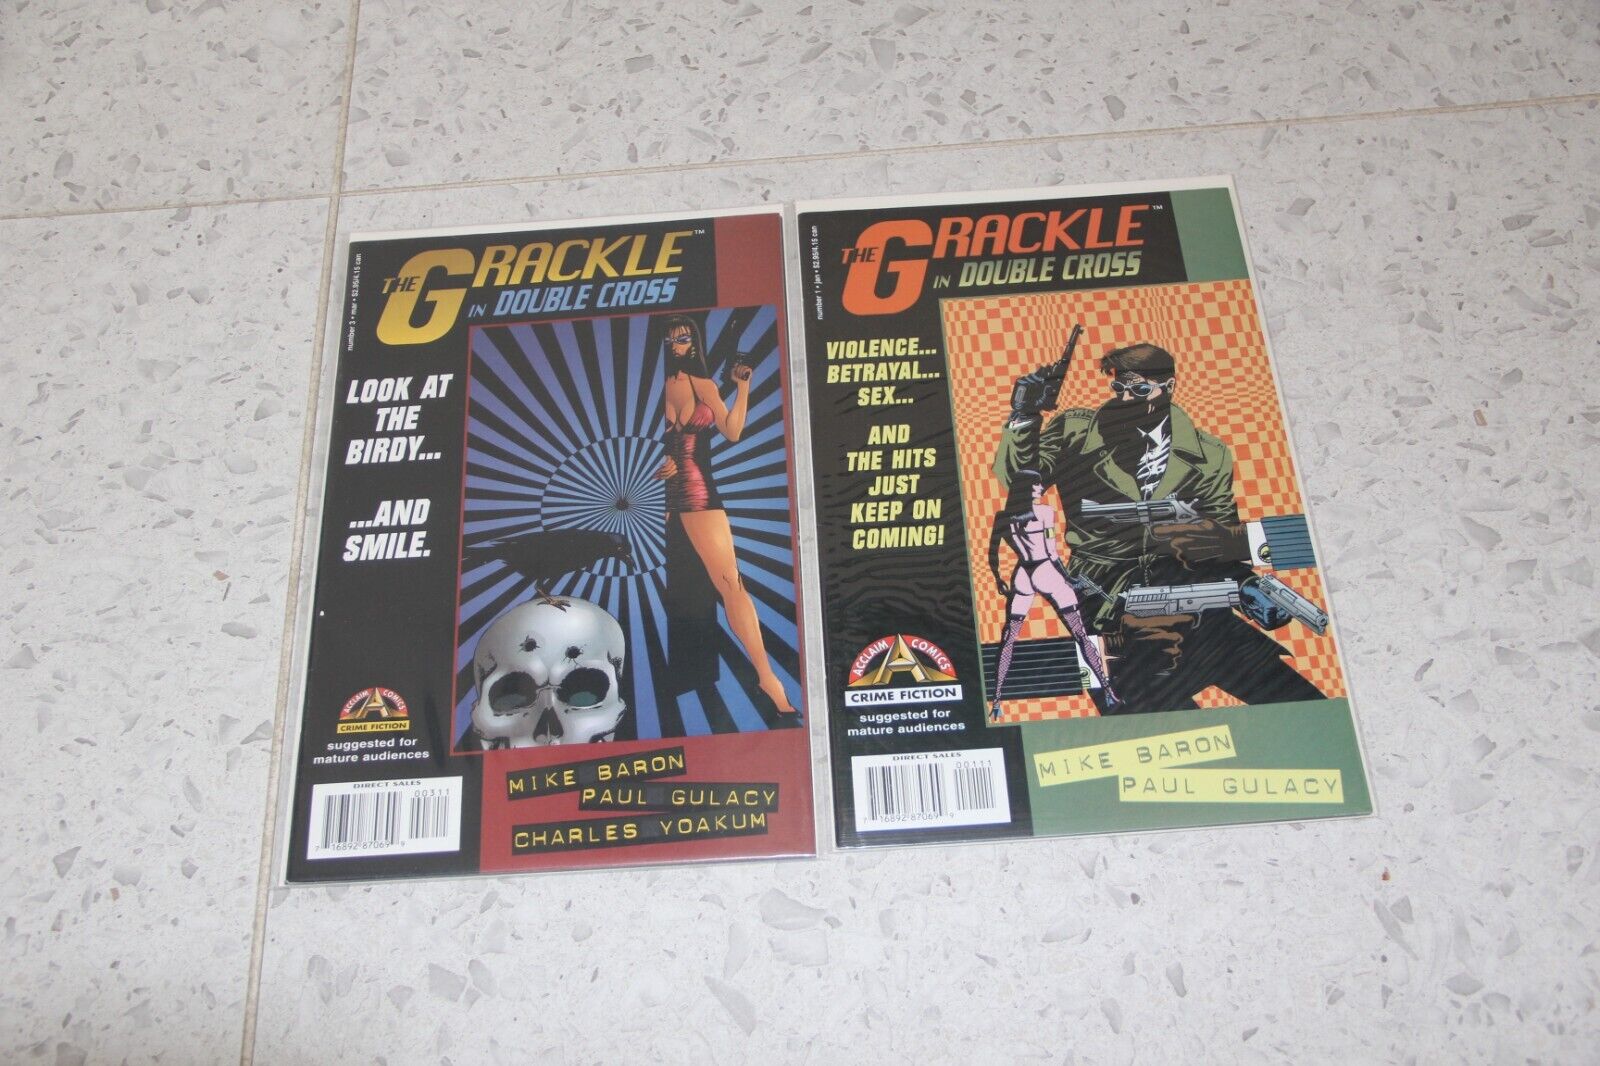 THE GRACKLE IN DOUBLE CROSS #1 and 3 Acclaim Comic Book Lot